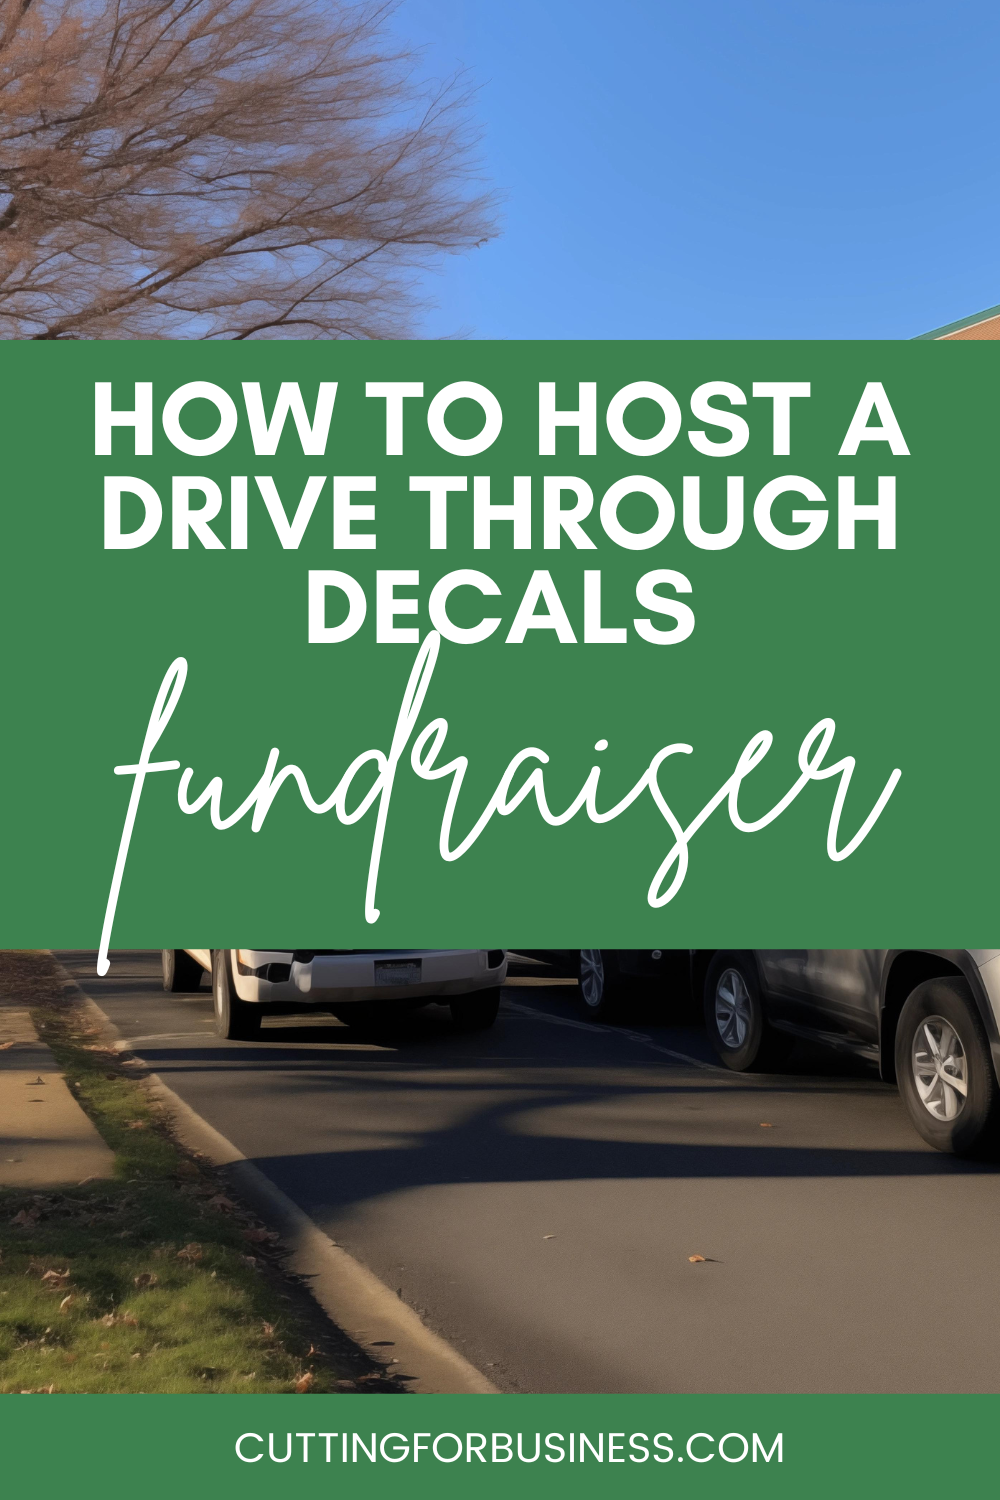 How to Organize a Drive Through Decals Fundraiser - cuttingforbusiness.com